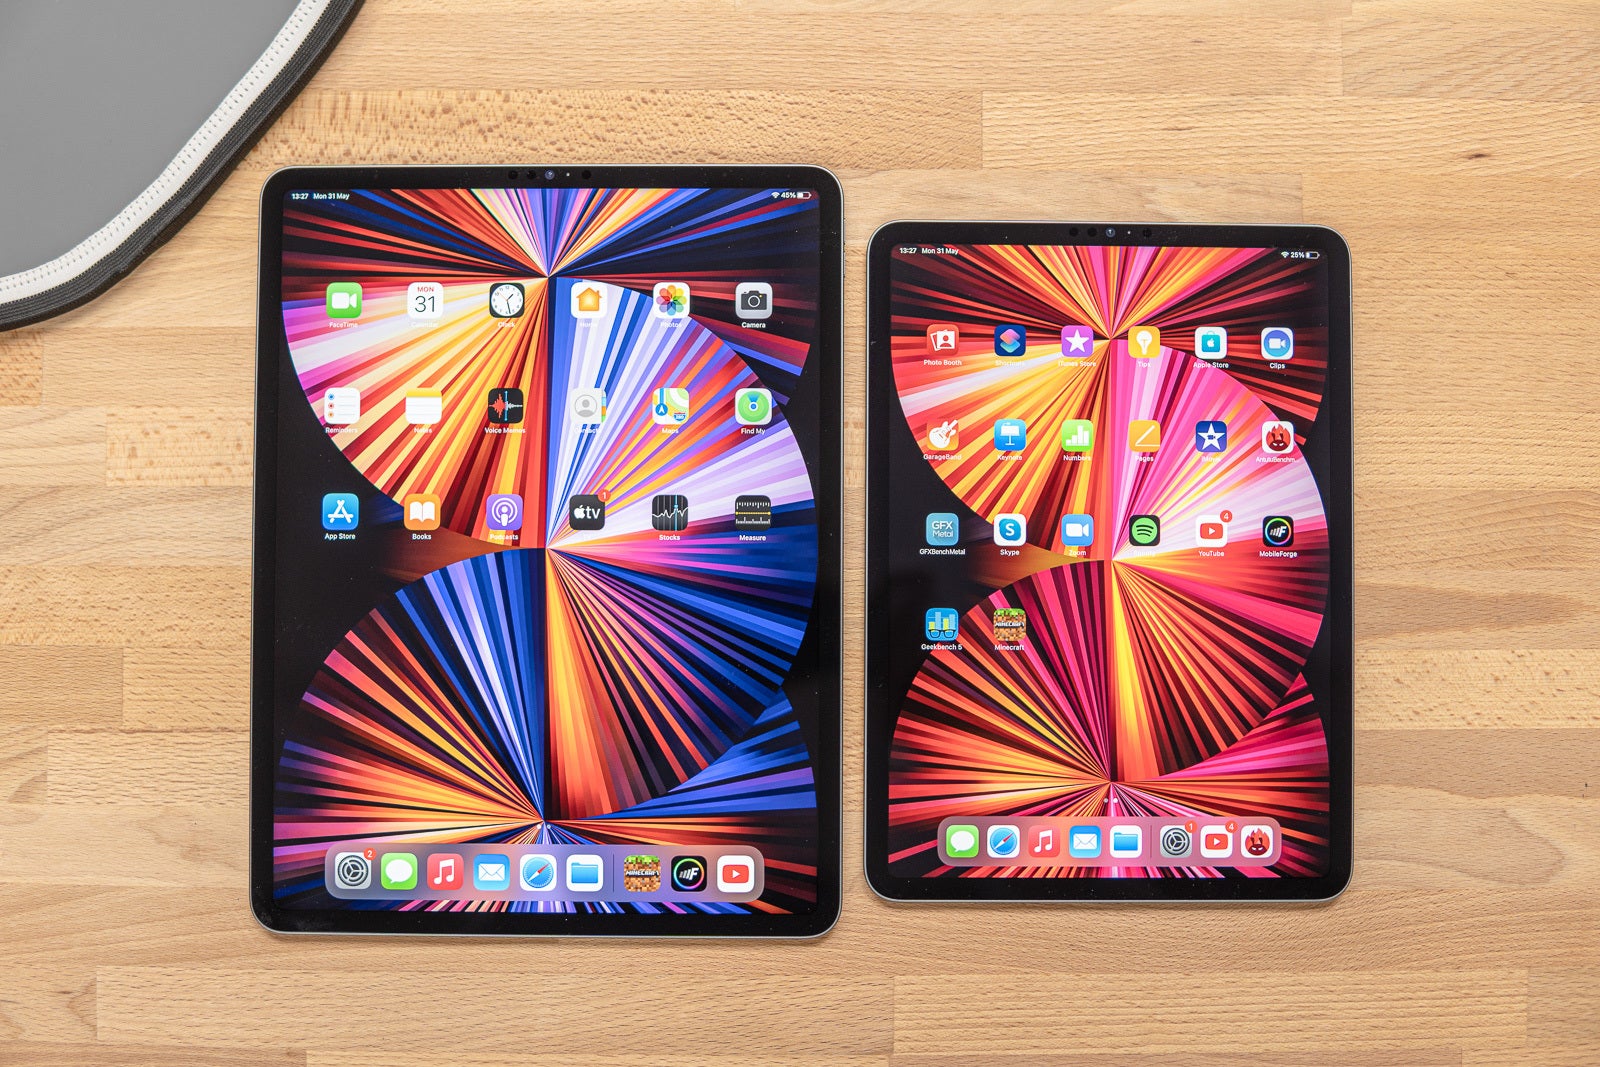 Mini-LED 12.9-inch M1 iPad Pro vs LCD 11-inch M1 iPad Pro - Apple tipped to release 10.9-inch OLED iPad Air in 2022, OLED iPad Pro in 2023